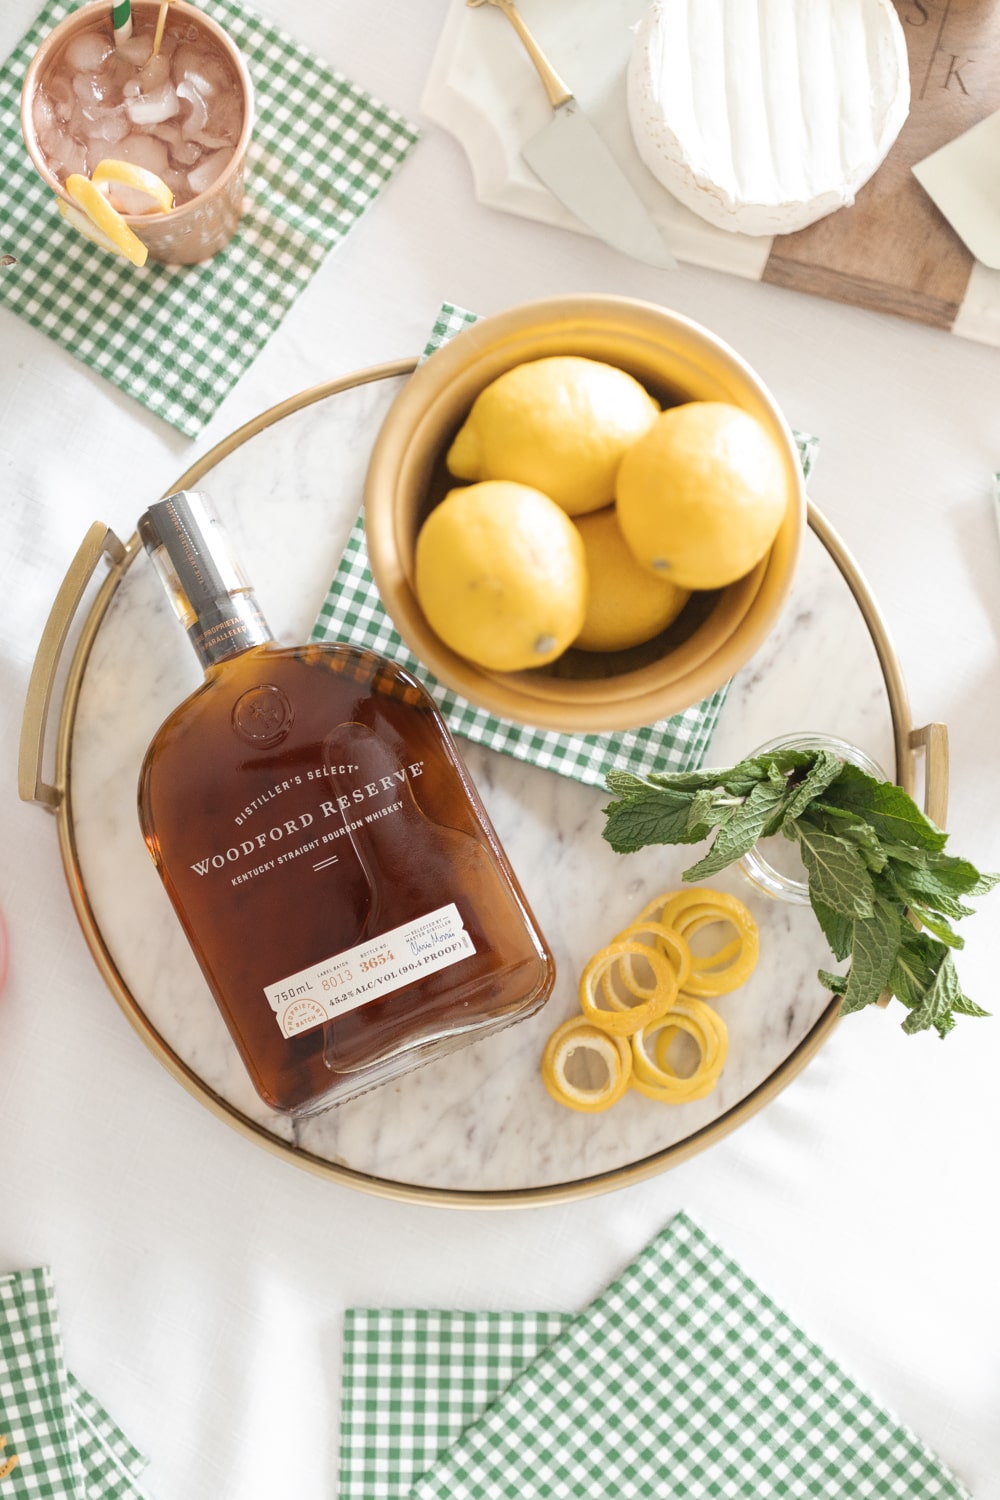 Bottle of Woodford Reserve bourbon featured on Diary of a Debutante